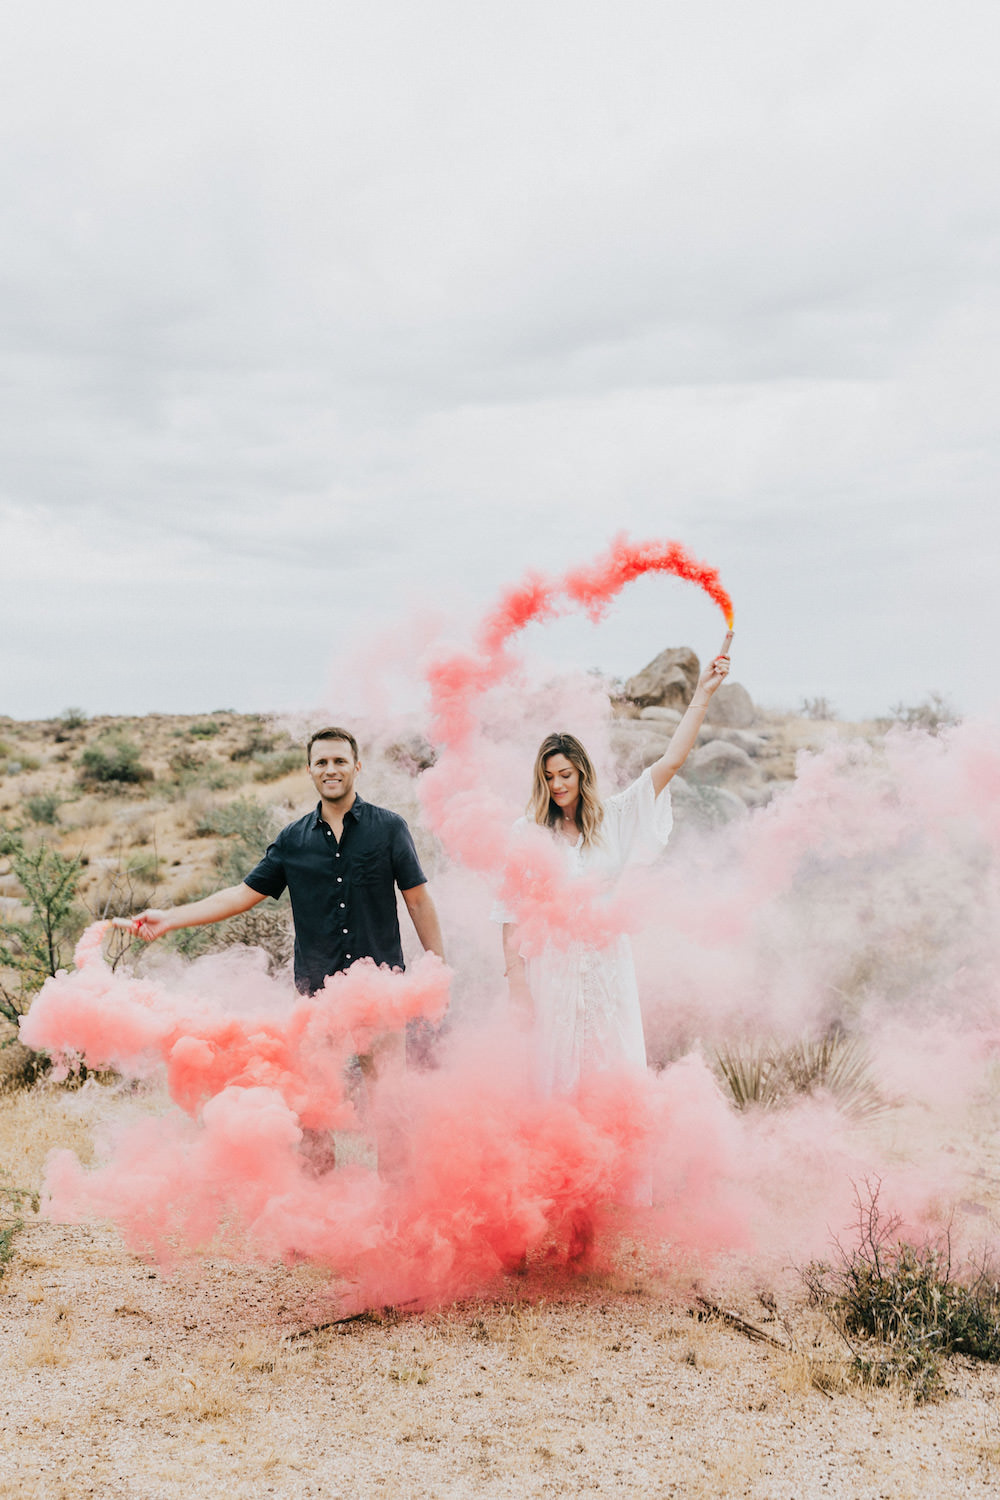 Dash of Darling shares her gender reveal on her first viable pregnancy post IVF treatments